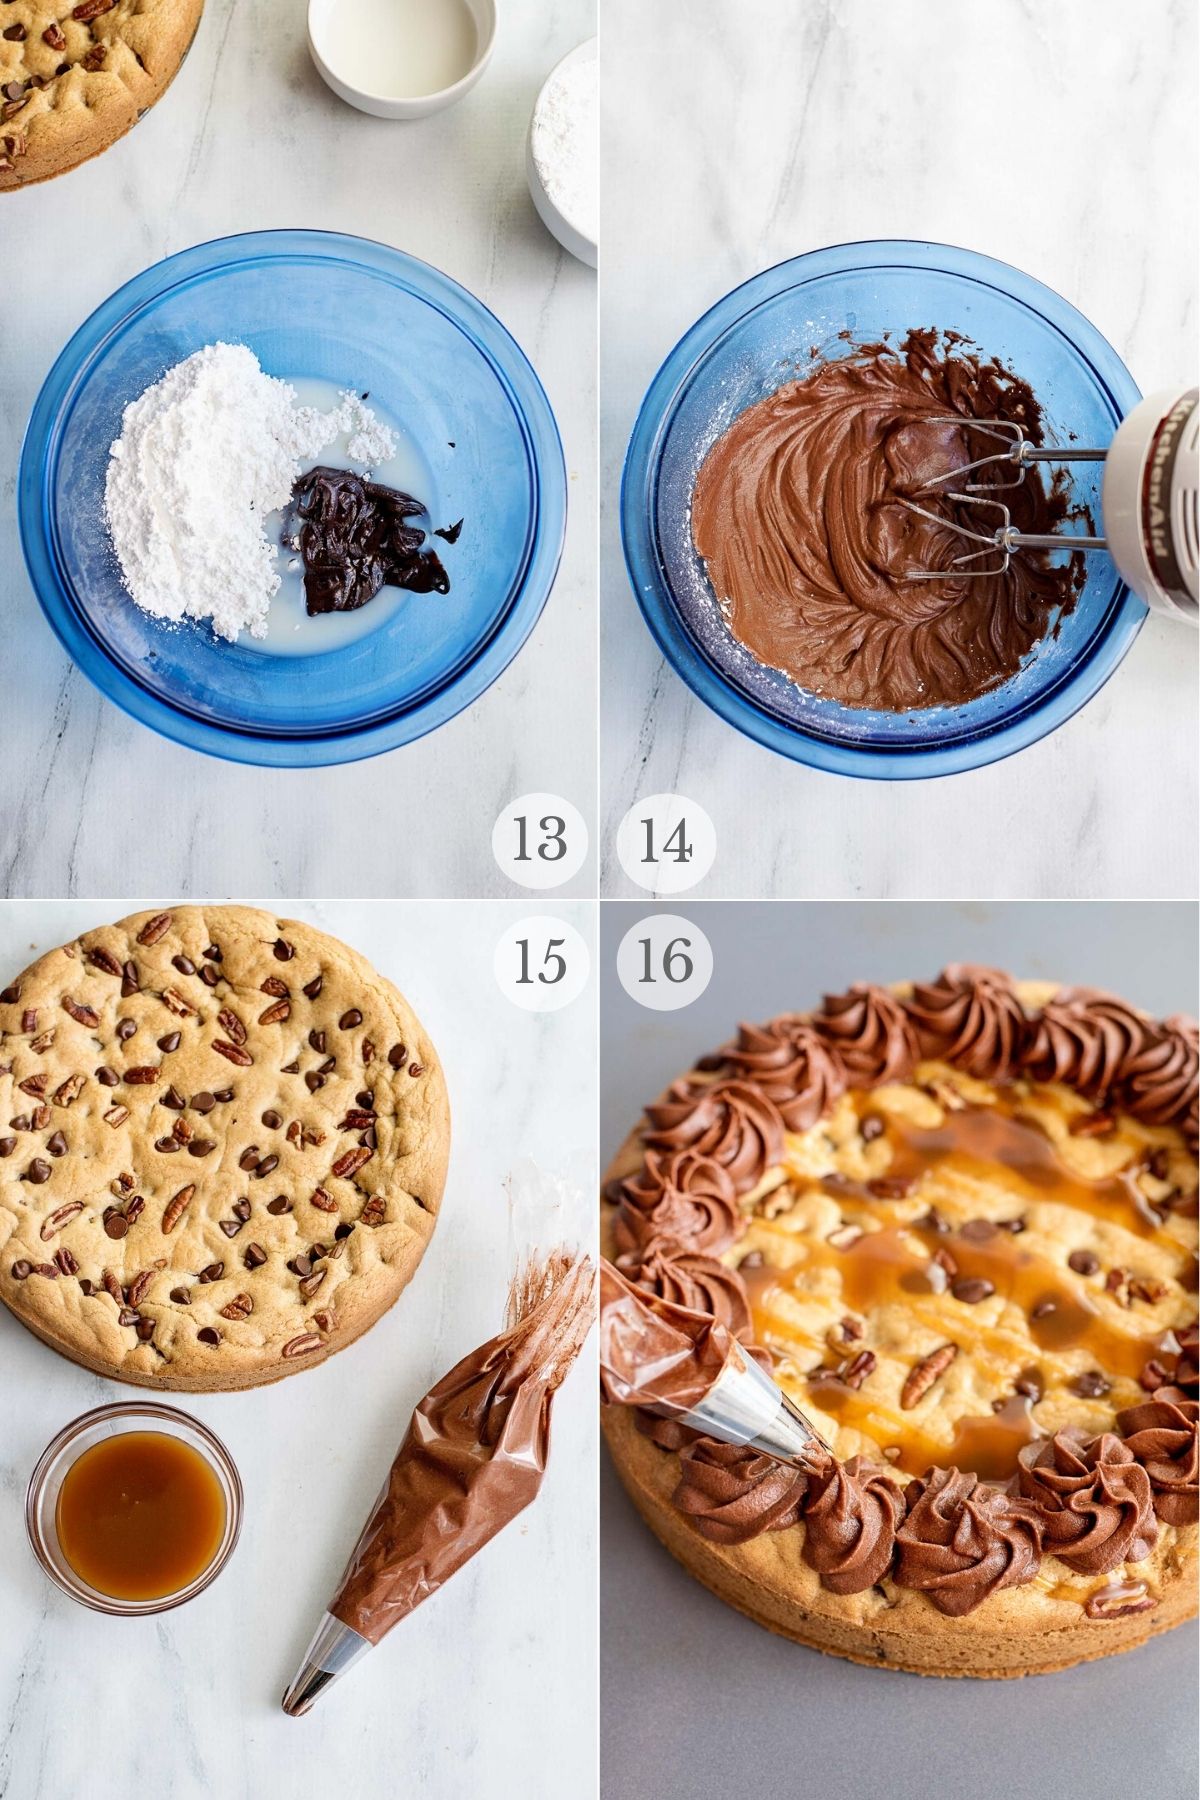 Cookie cake recipe steps collage 13-16